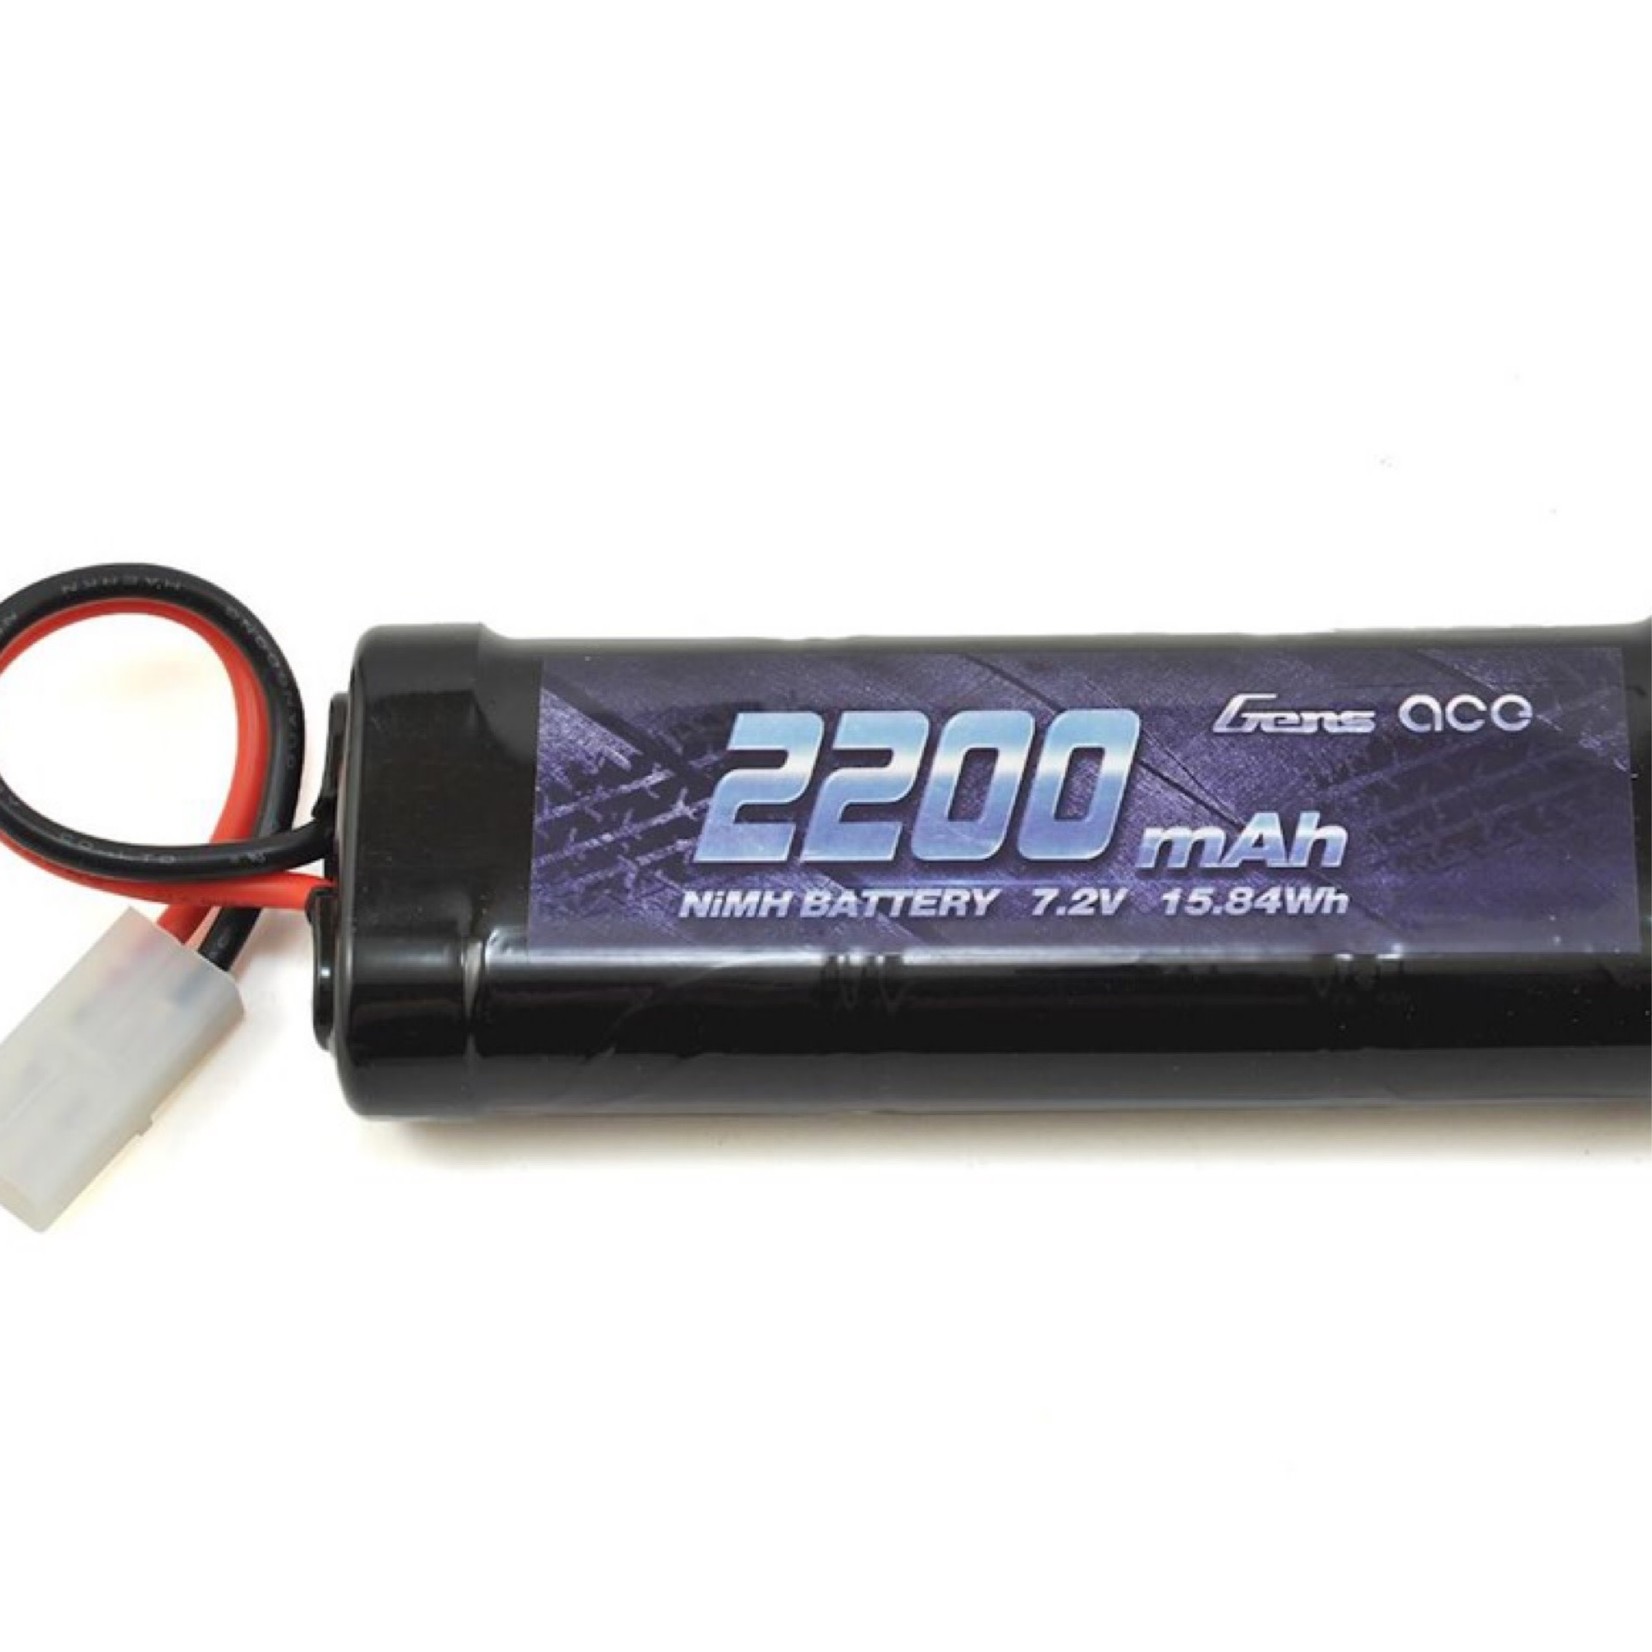 Gens Ace Gens Ace 7.2V NiMH Battery Pack w/Tamiya Connector (2200mAh) #GEANM22006ST